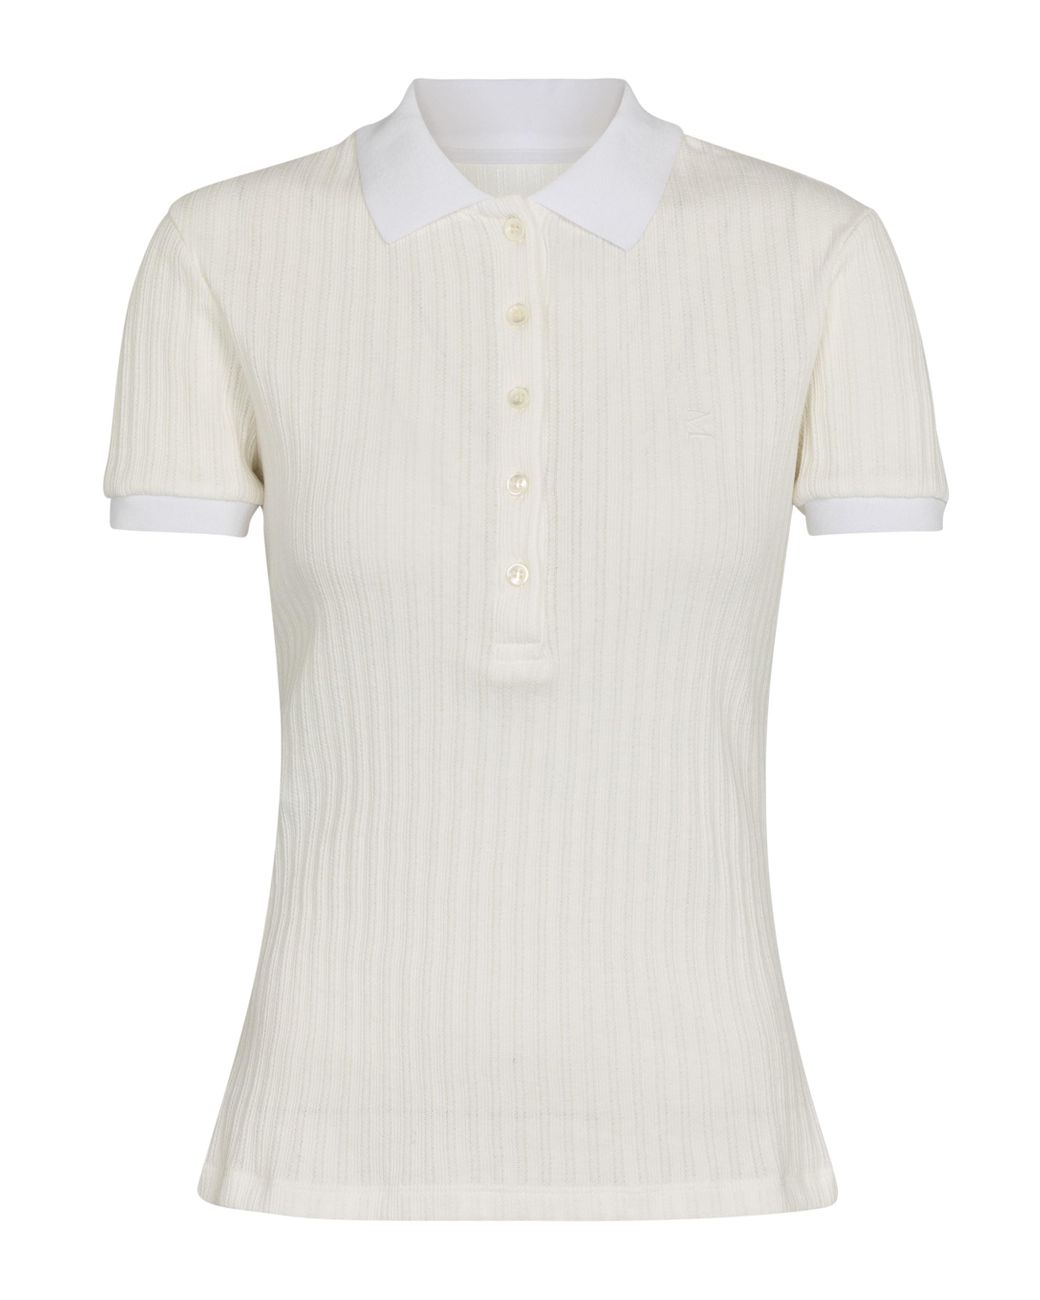 Maison Margiela Ribbed-knit Cotton Polo Shirt in White - Lyst